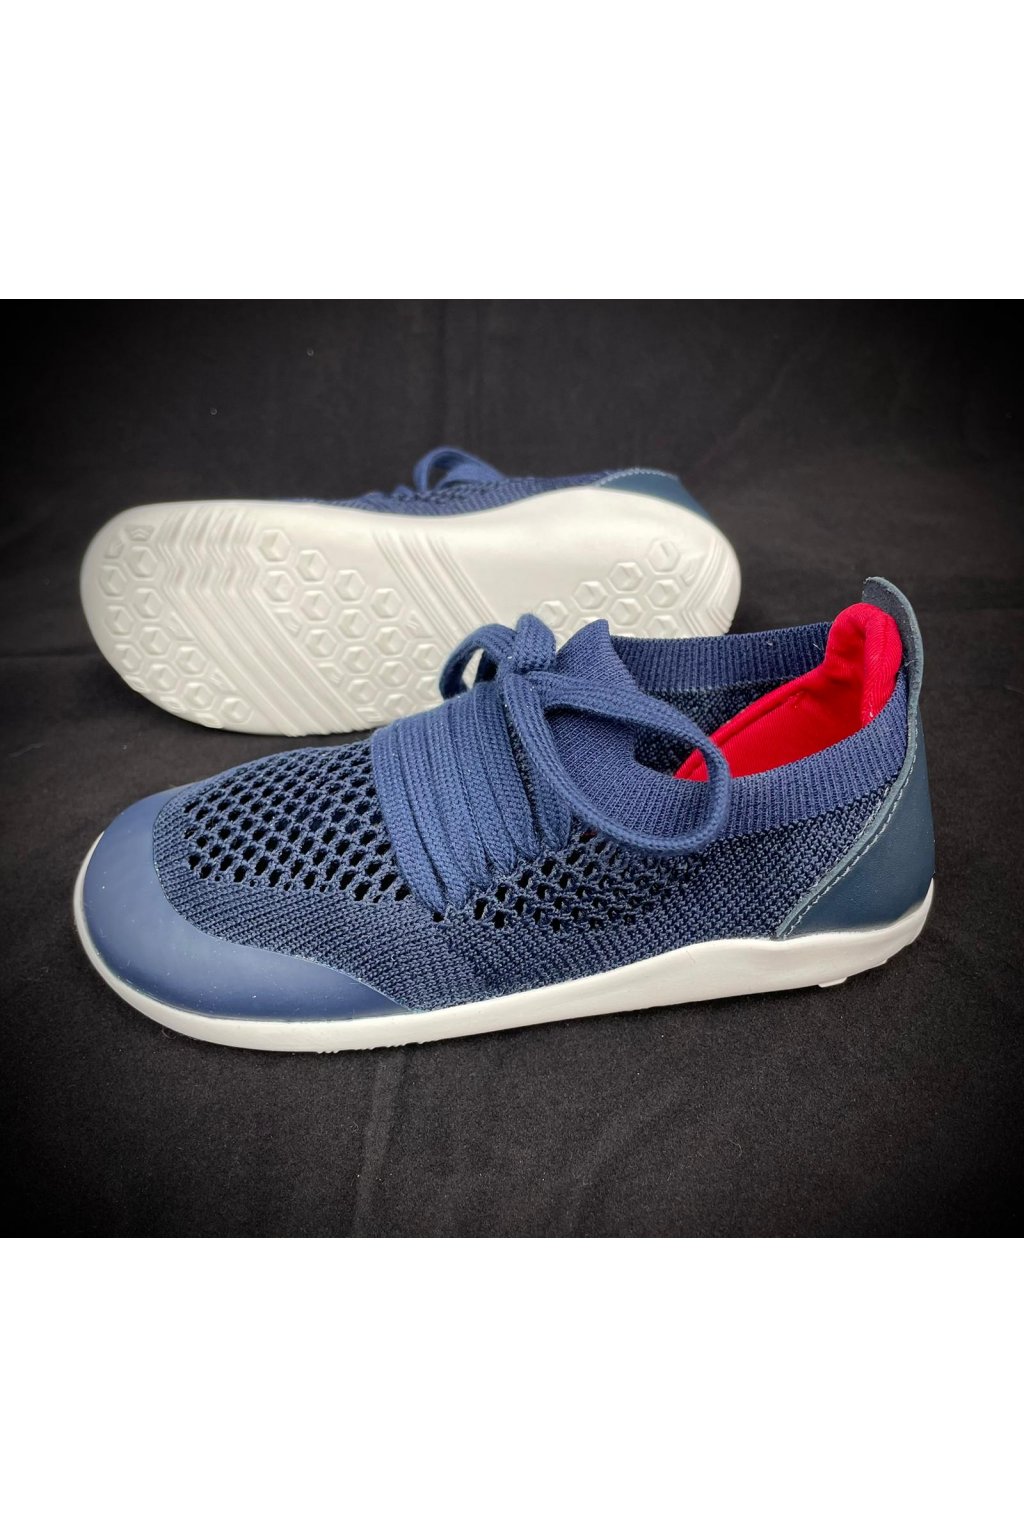 Bobux - Play Knit Navy Red - BAREFOOTOVO.SK